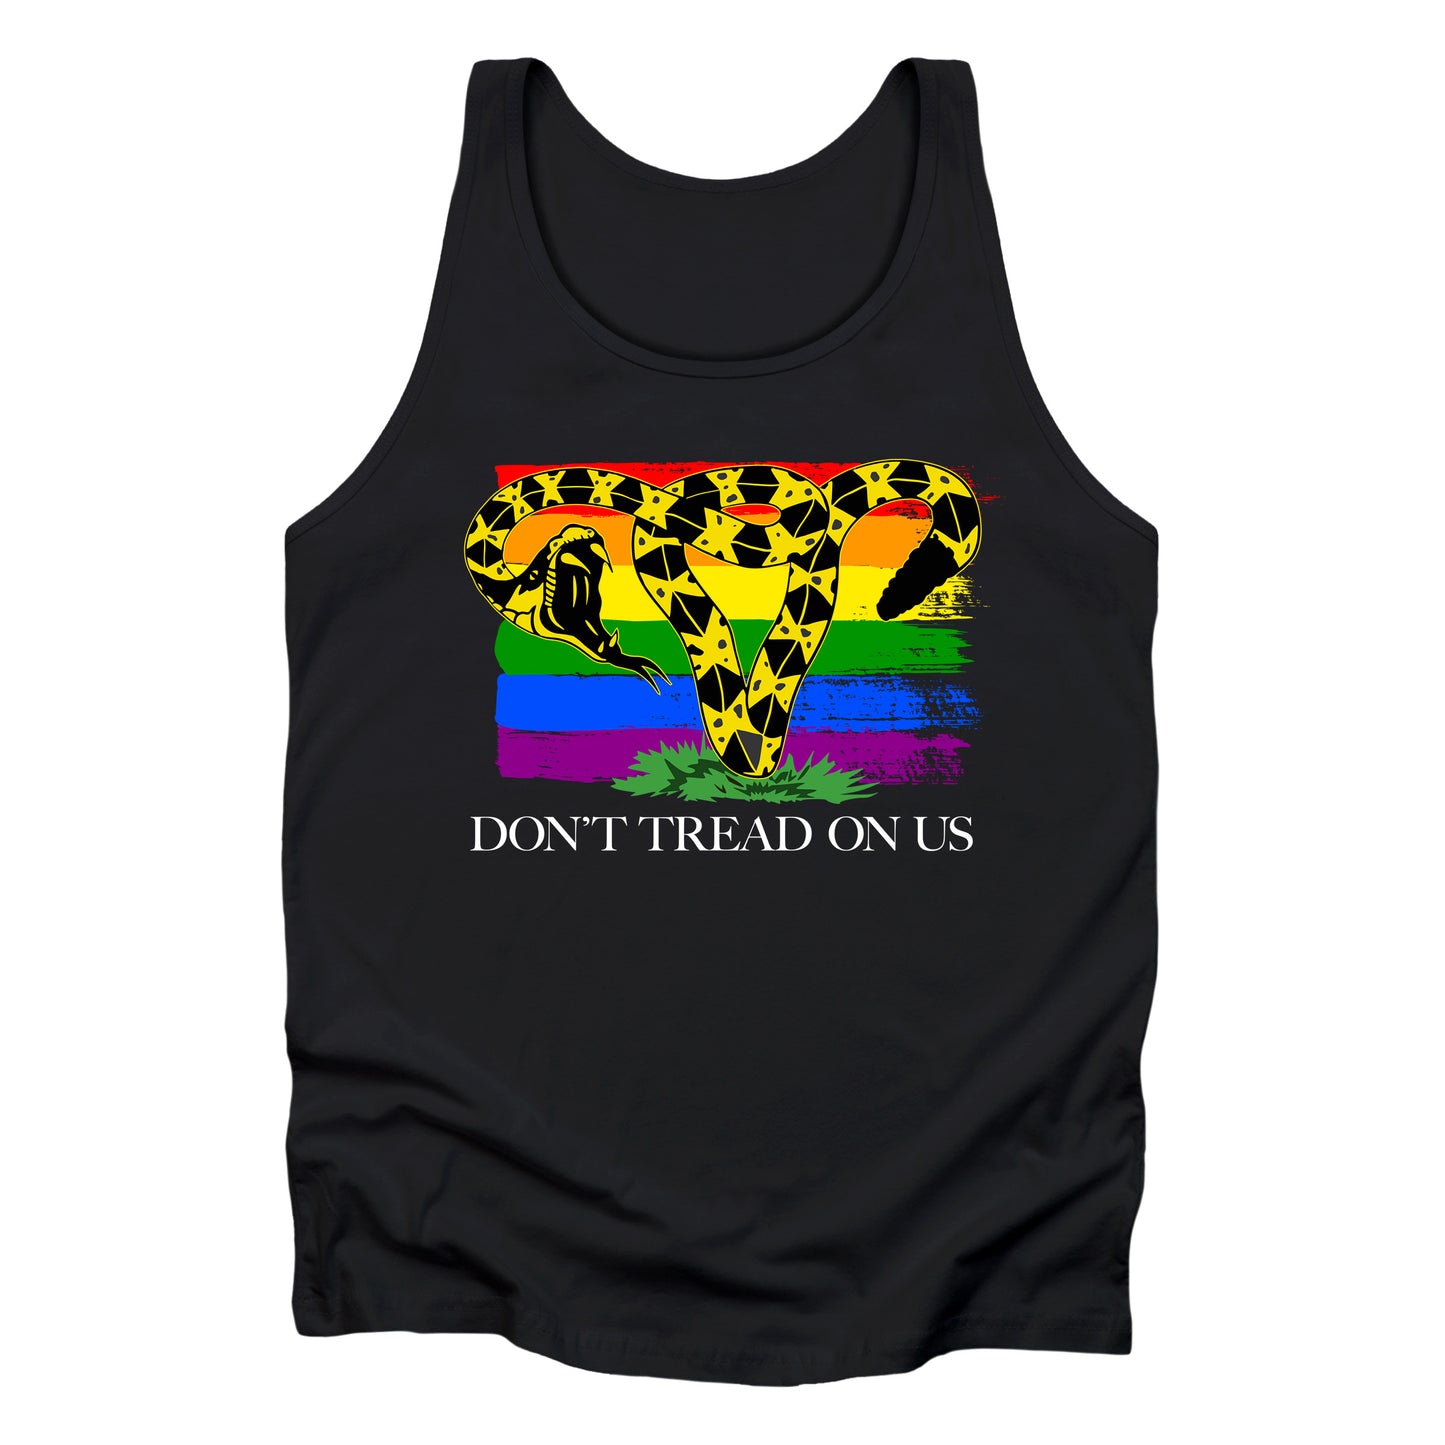 Black unisex tank top with the “Don’t tread on me” snake redrawn into the shape of a uterus. A rainbow flag is painted in the background. Underneath the image reads “Don’t tread on us” in all caps.